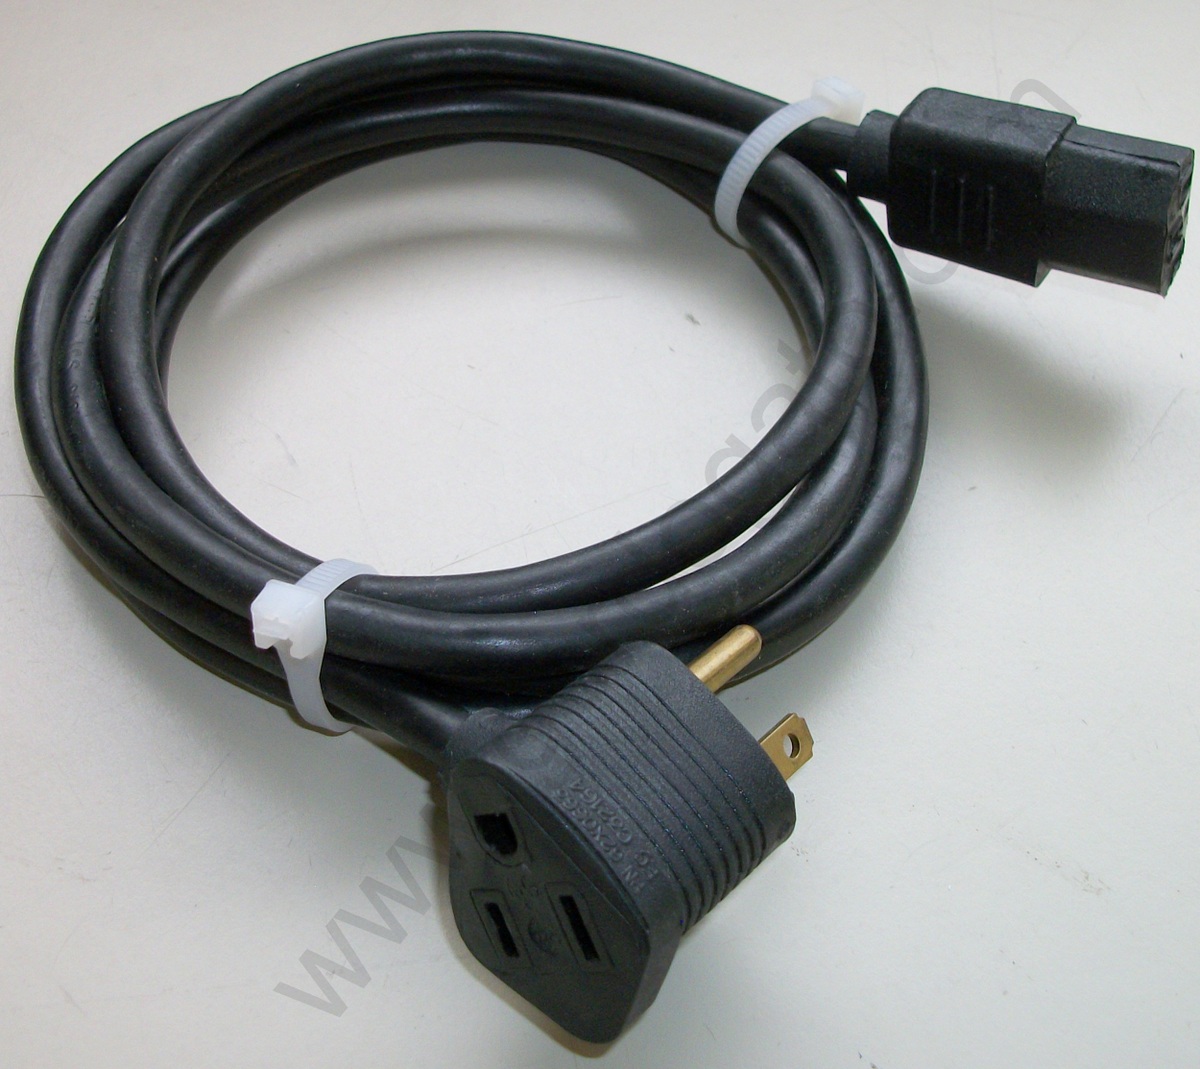 IBM 62X0663 6' Standard Power Cable Cord